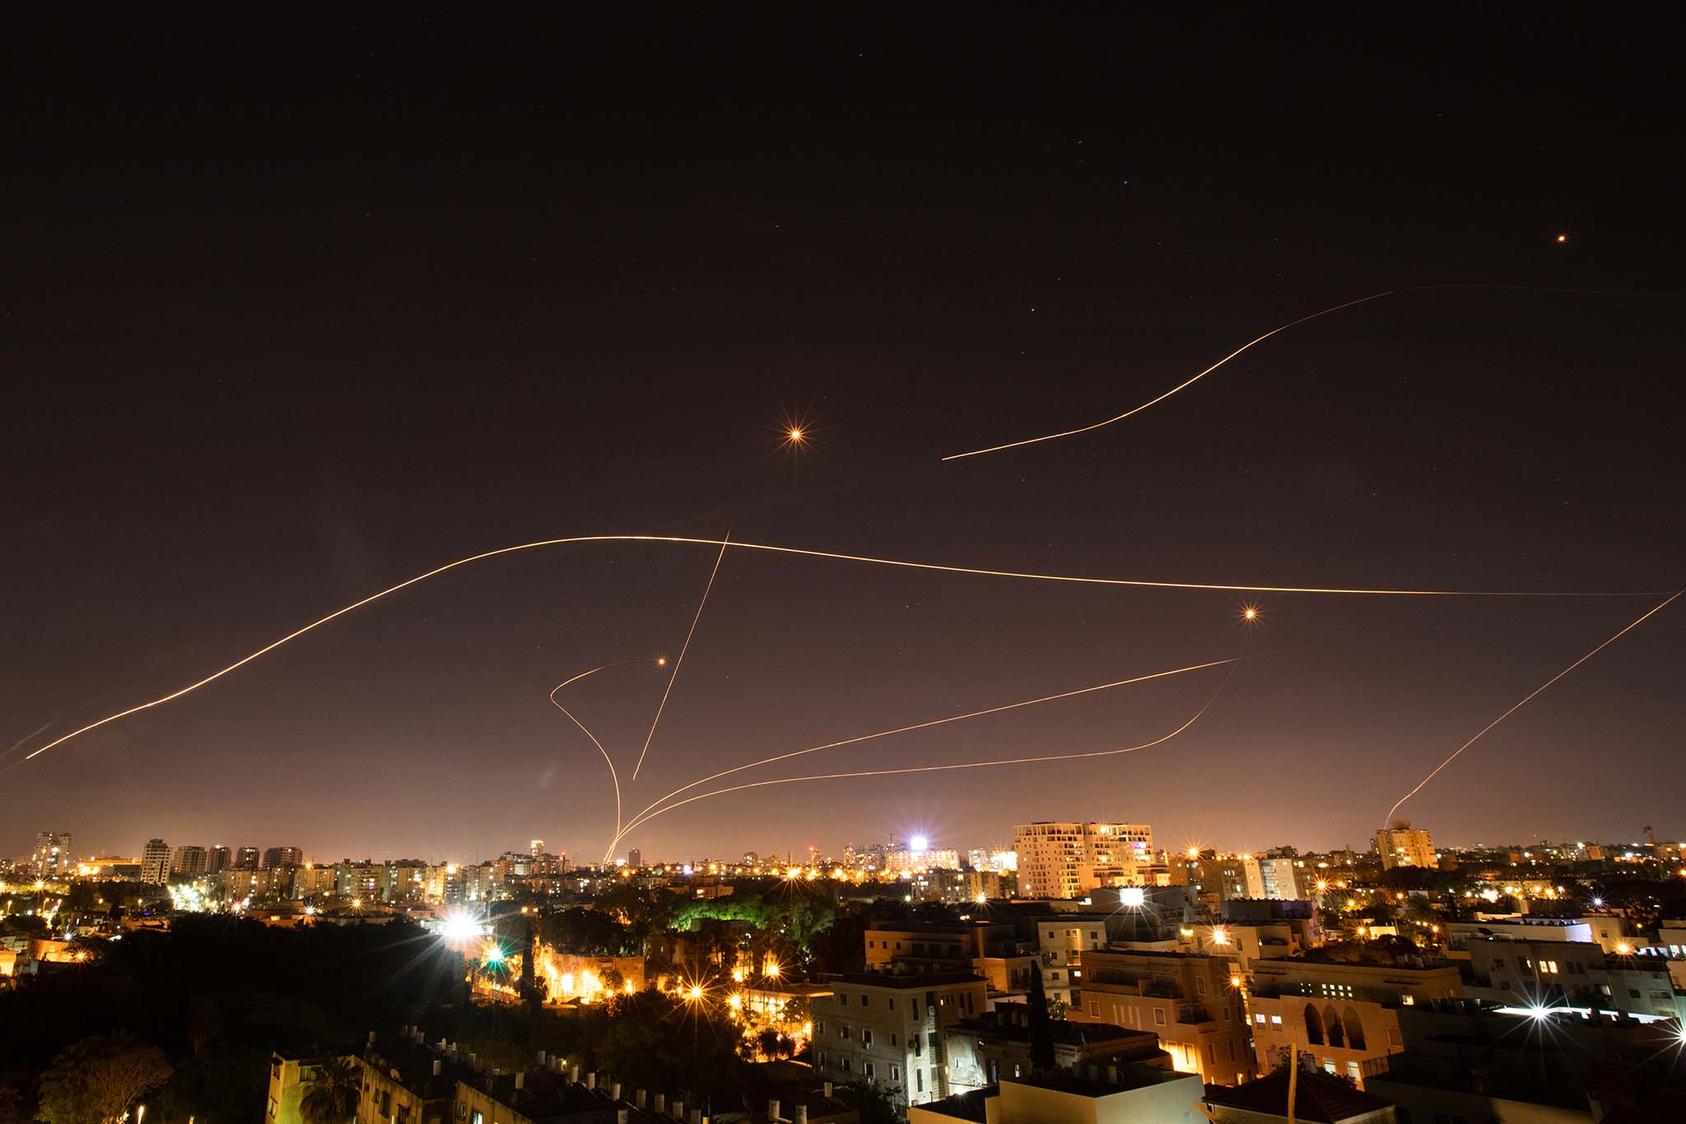 Israel’s Iron Dome missile defense system intercepts rockets launched into Tel Aviv from the Gaza Strip, May 16, 2021. (Corinna Kern/The New York Times)